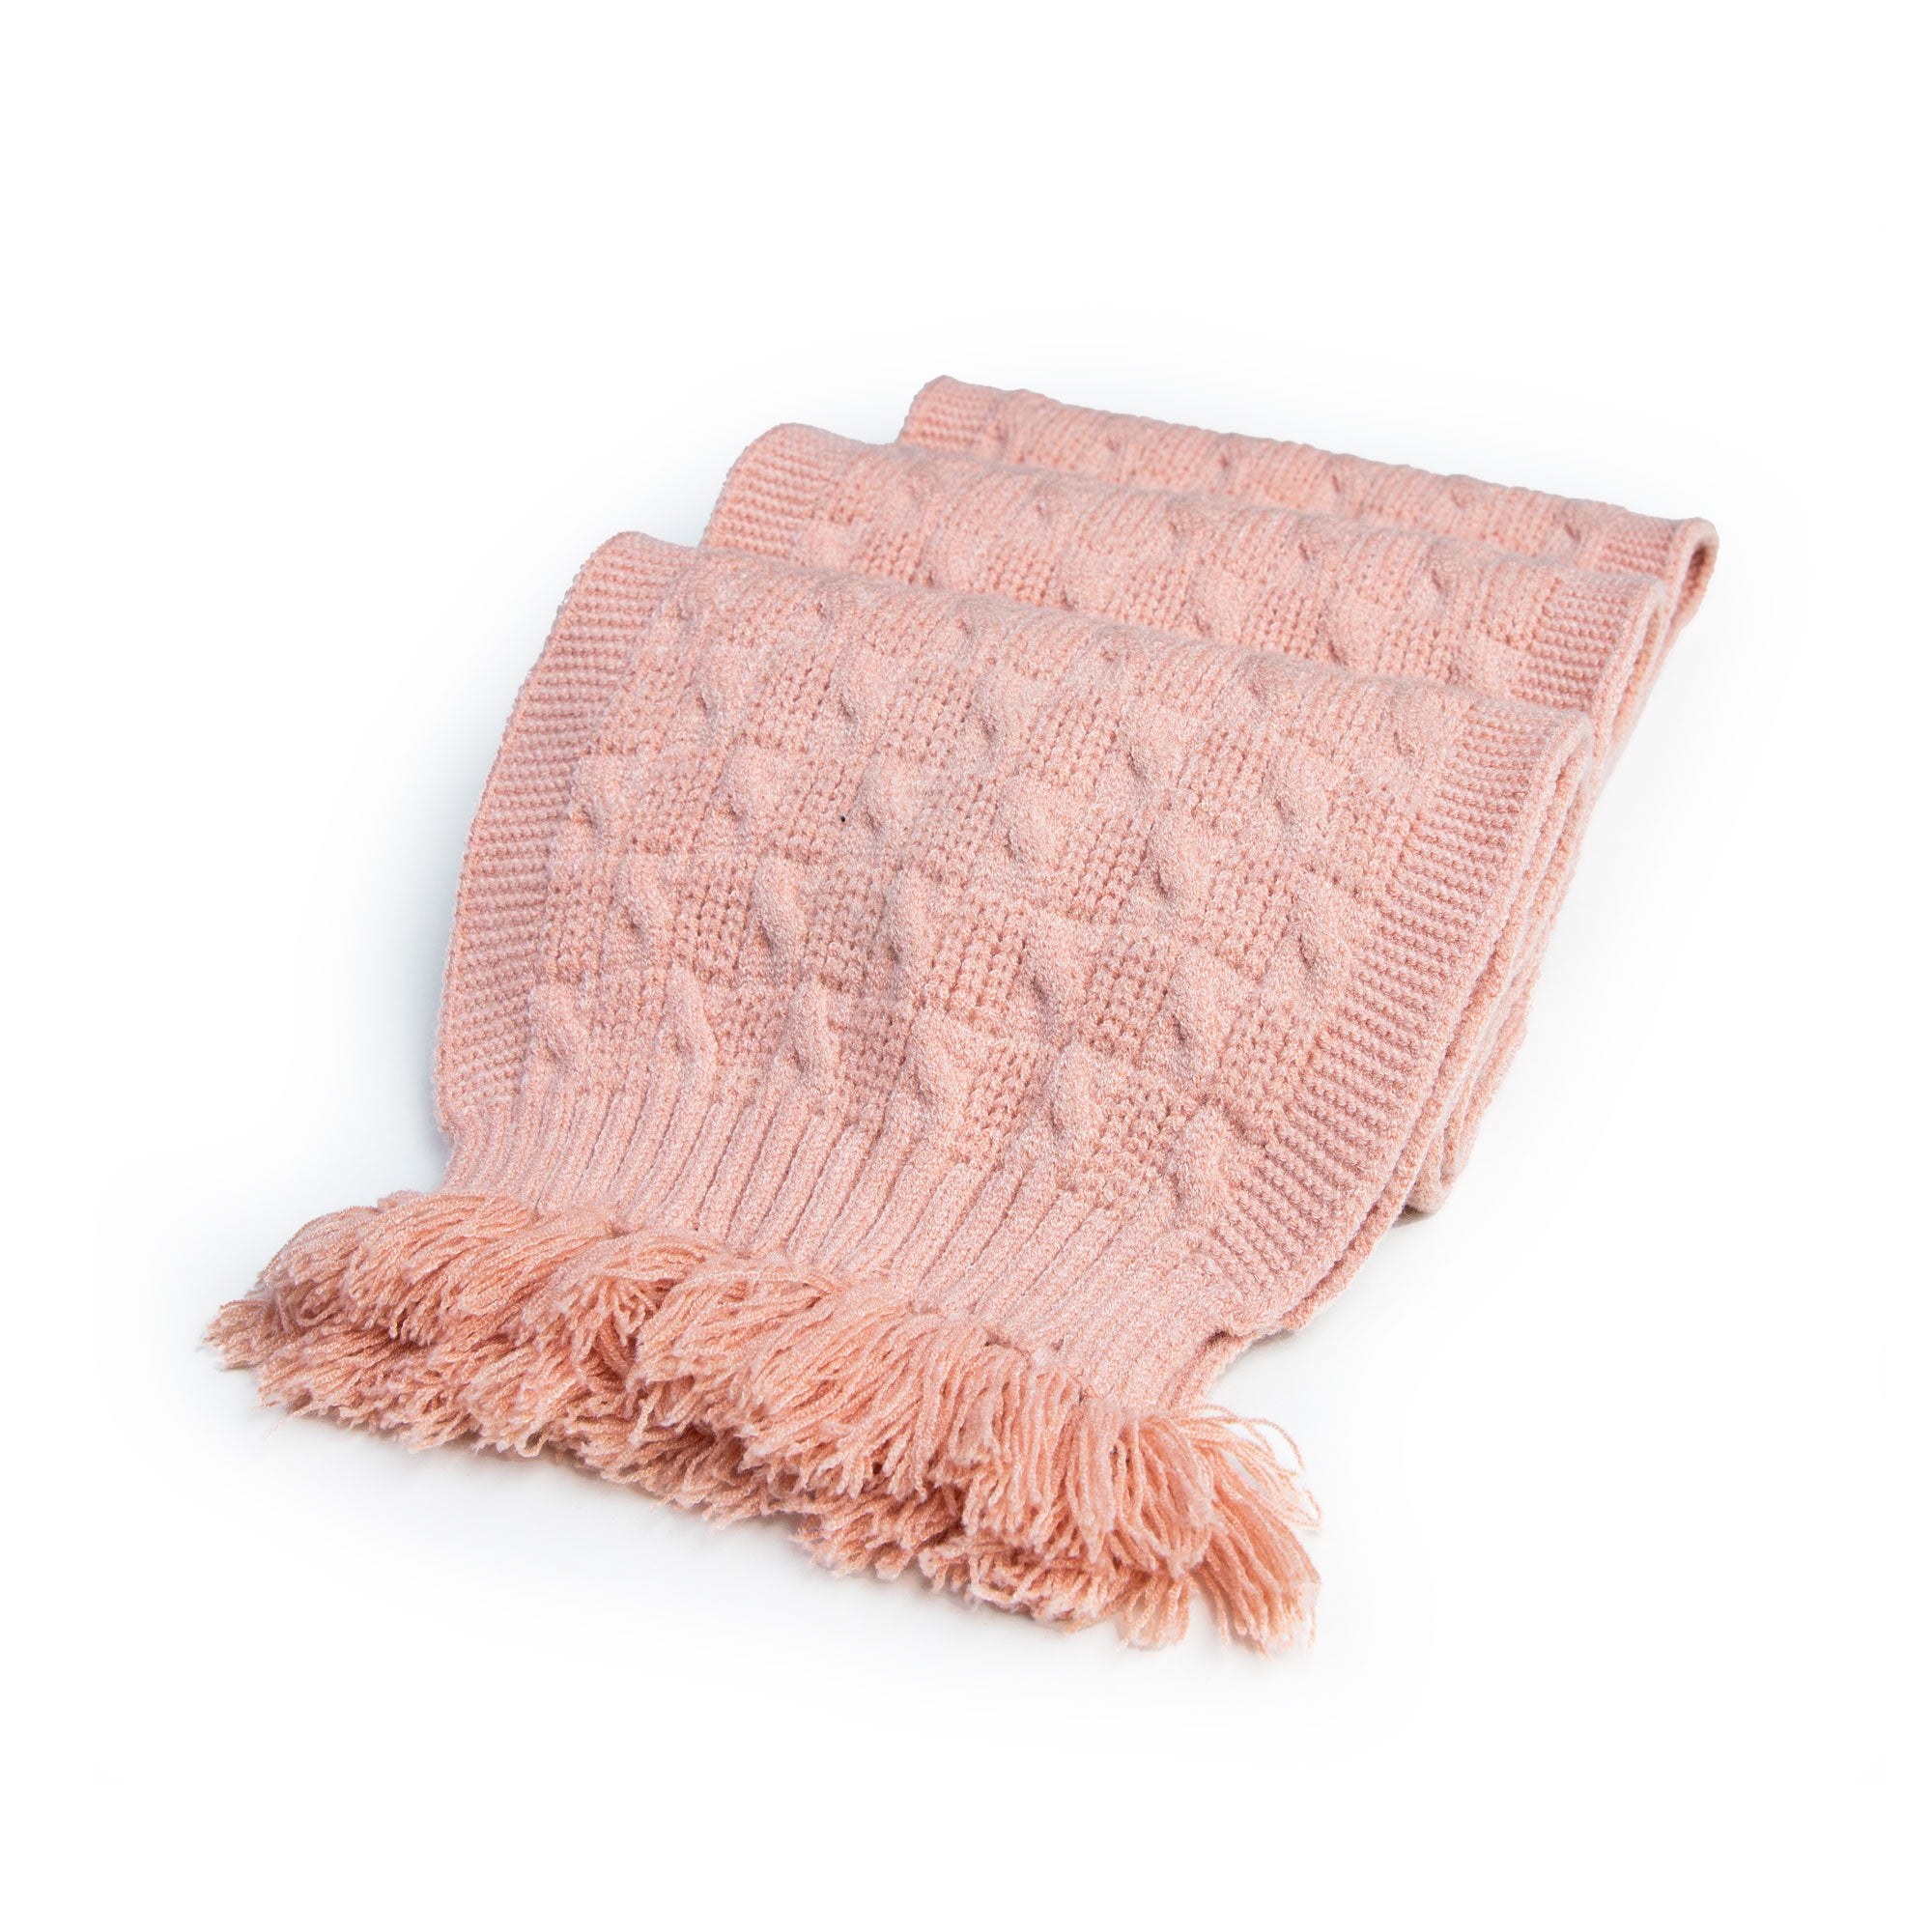 Peach cable Knitted Muffler